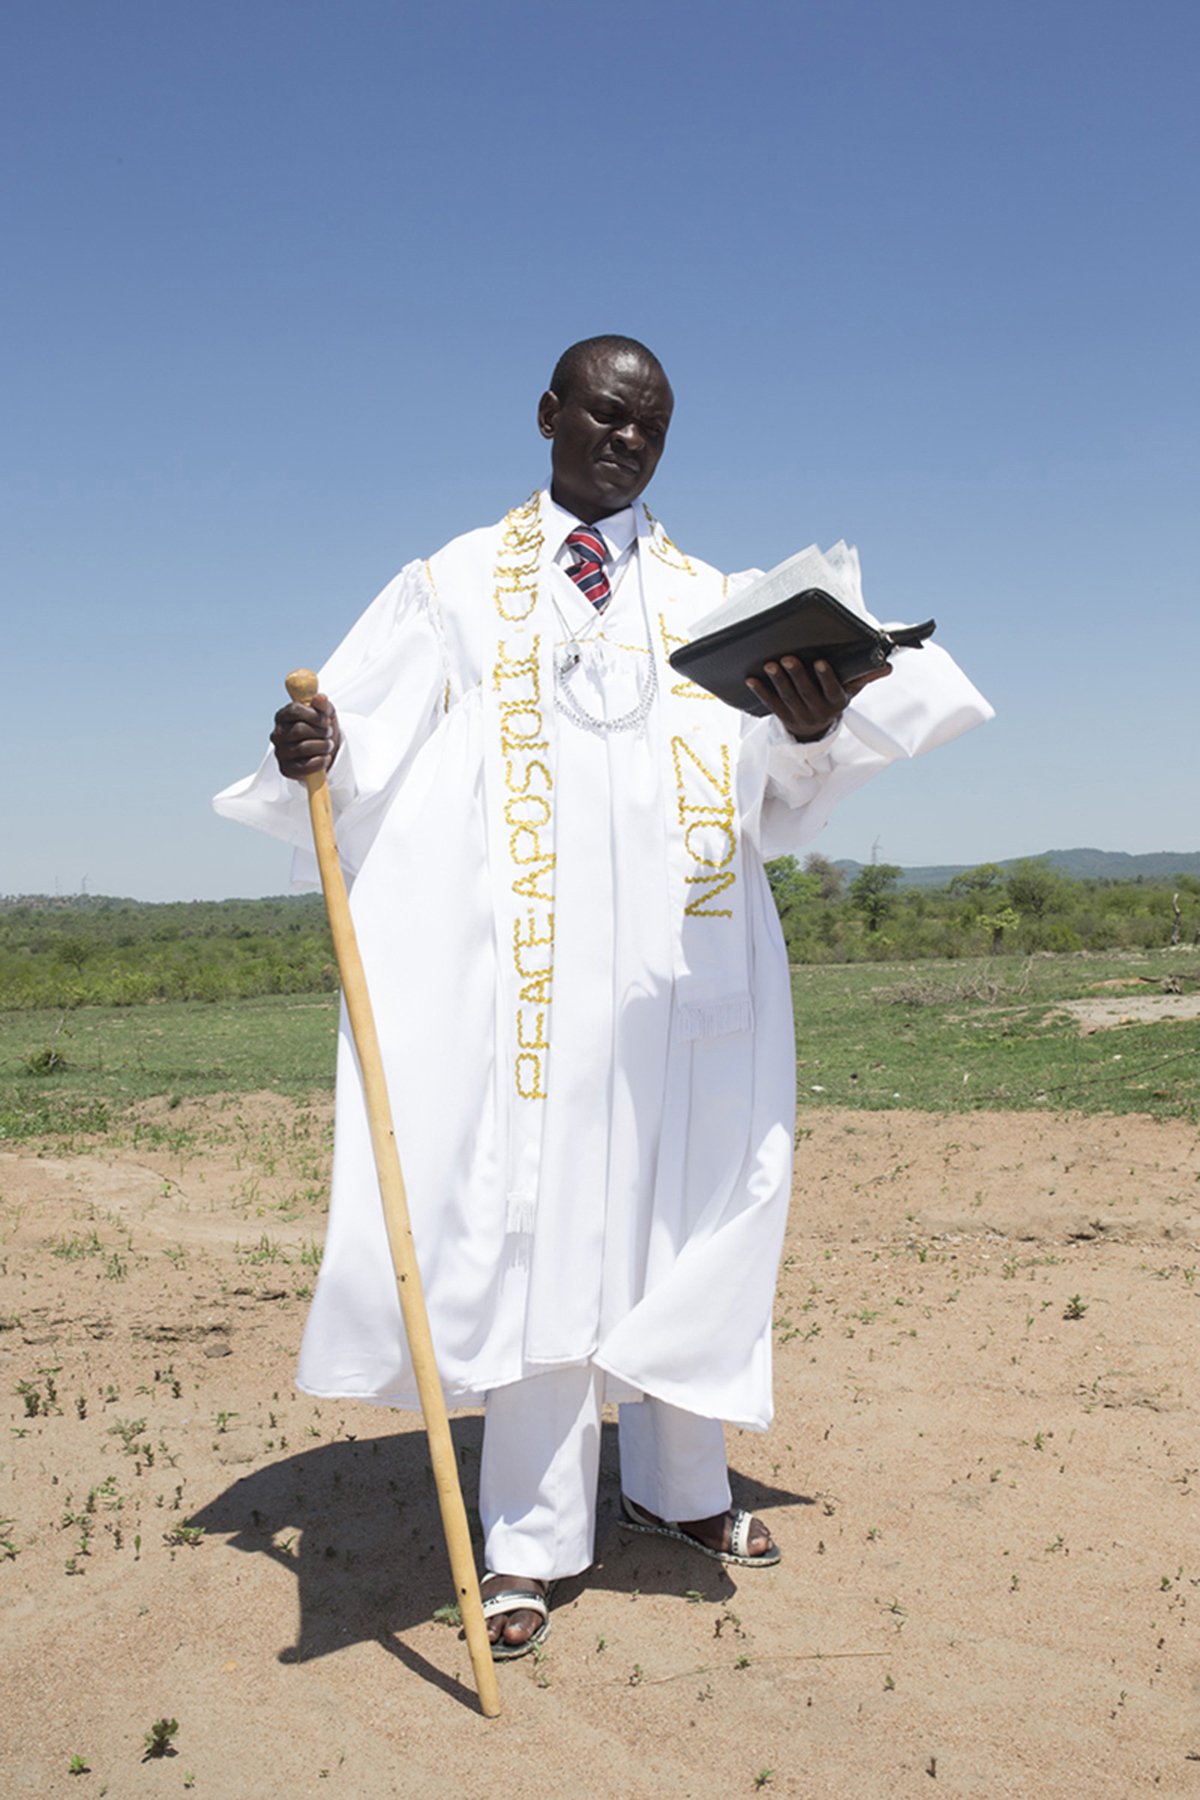 Giya Makondo-Wills, “They Came From The Water While The World Watched” – Pastor dressed in white and gold, holding a cane and a bible in a field